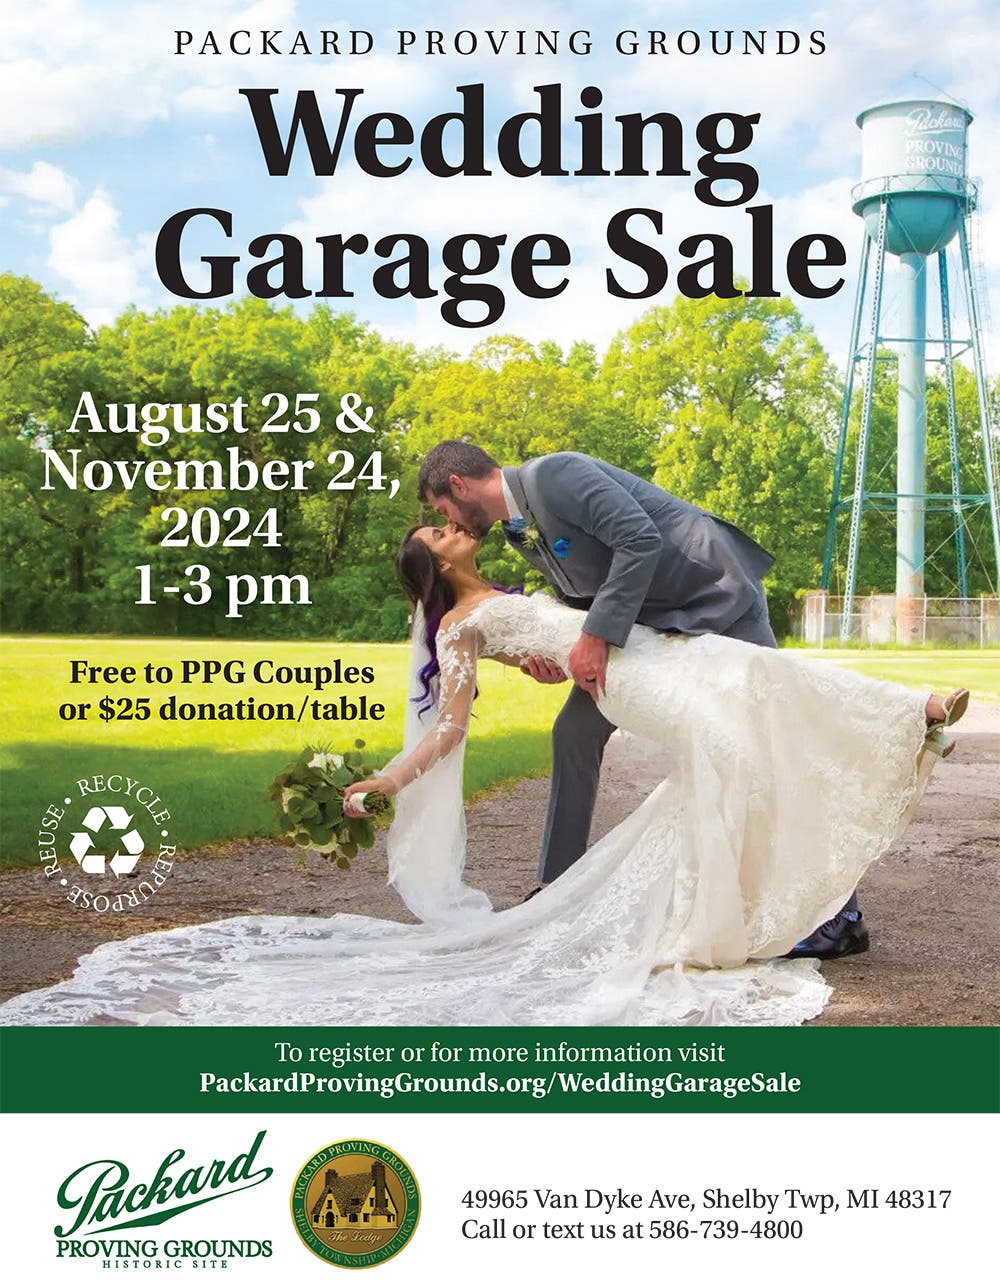 Wedding Garage Sale at the Packard Proving Grounds